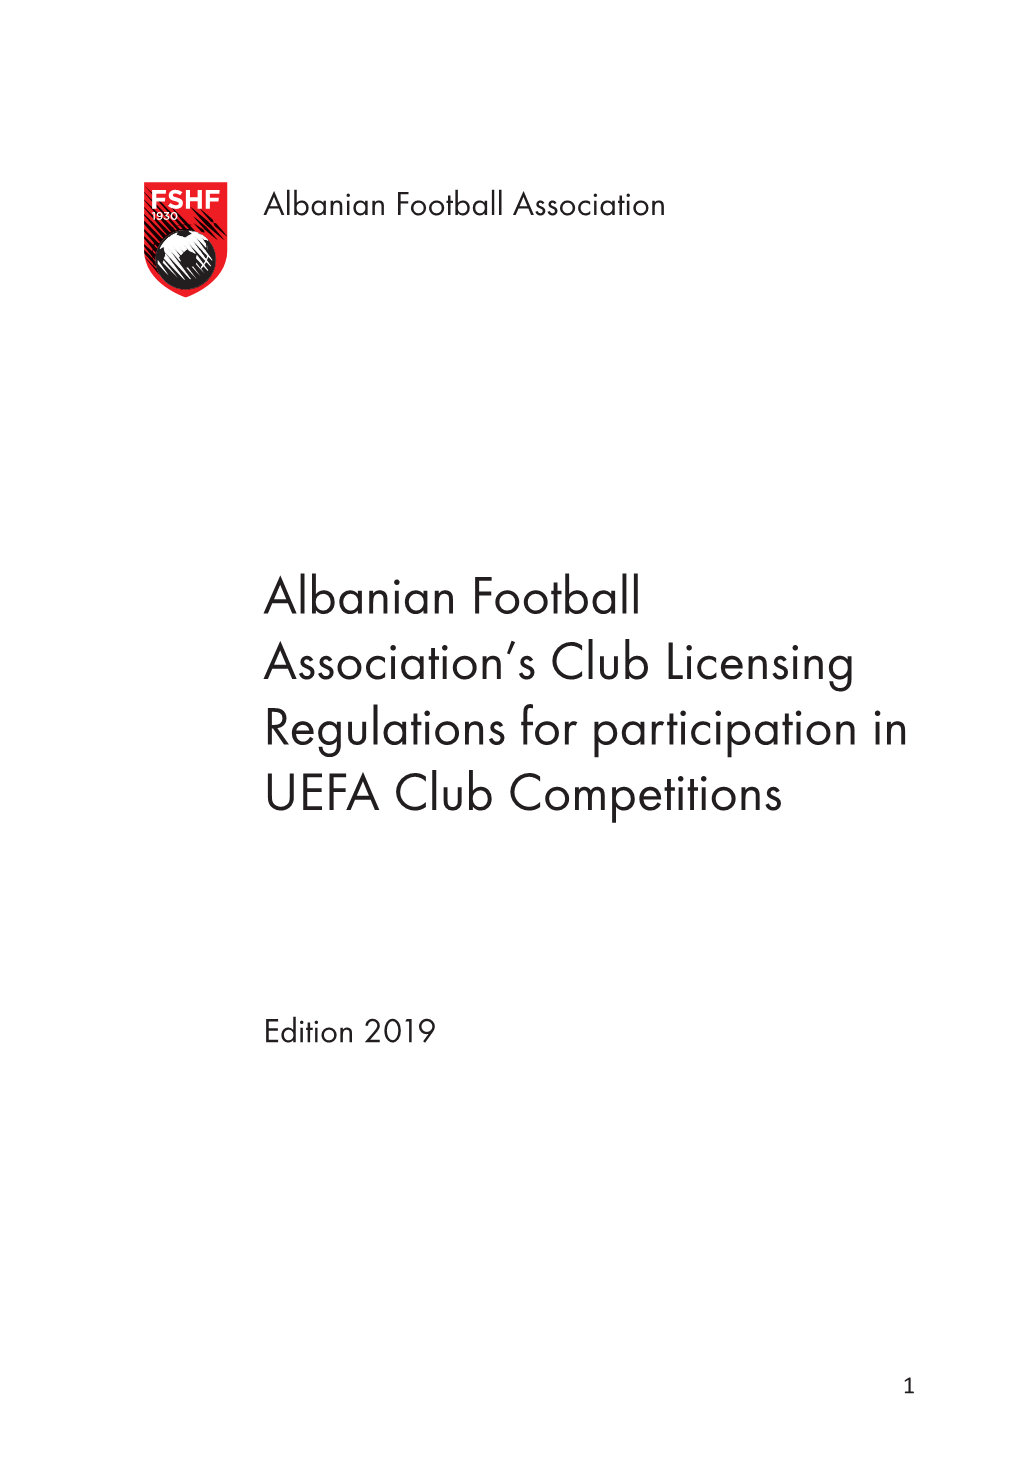 Albanian Football Association's Club Licensing Regulations for Participation in UEFA Club Competitions